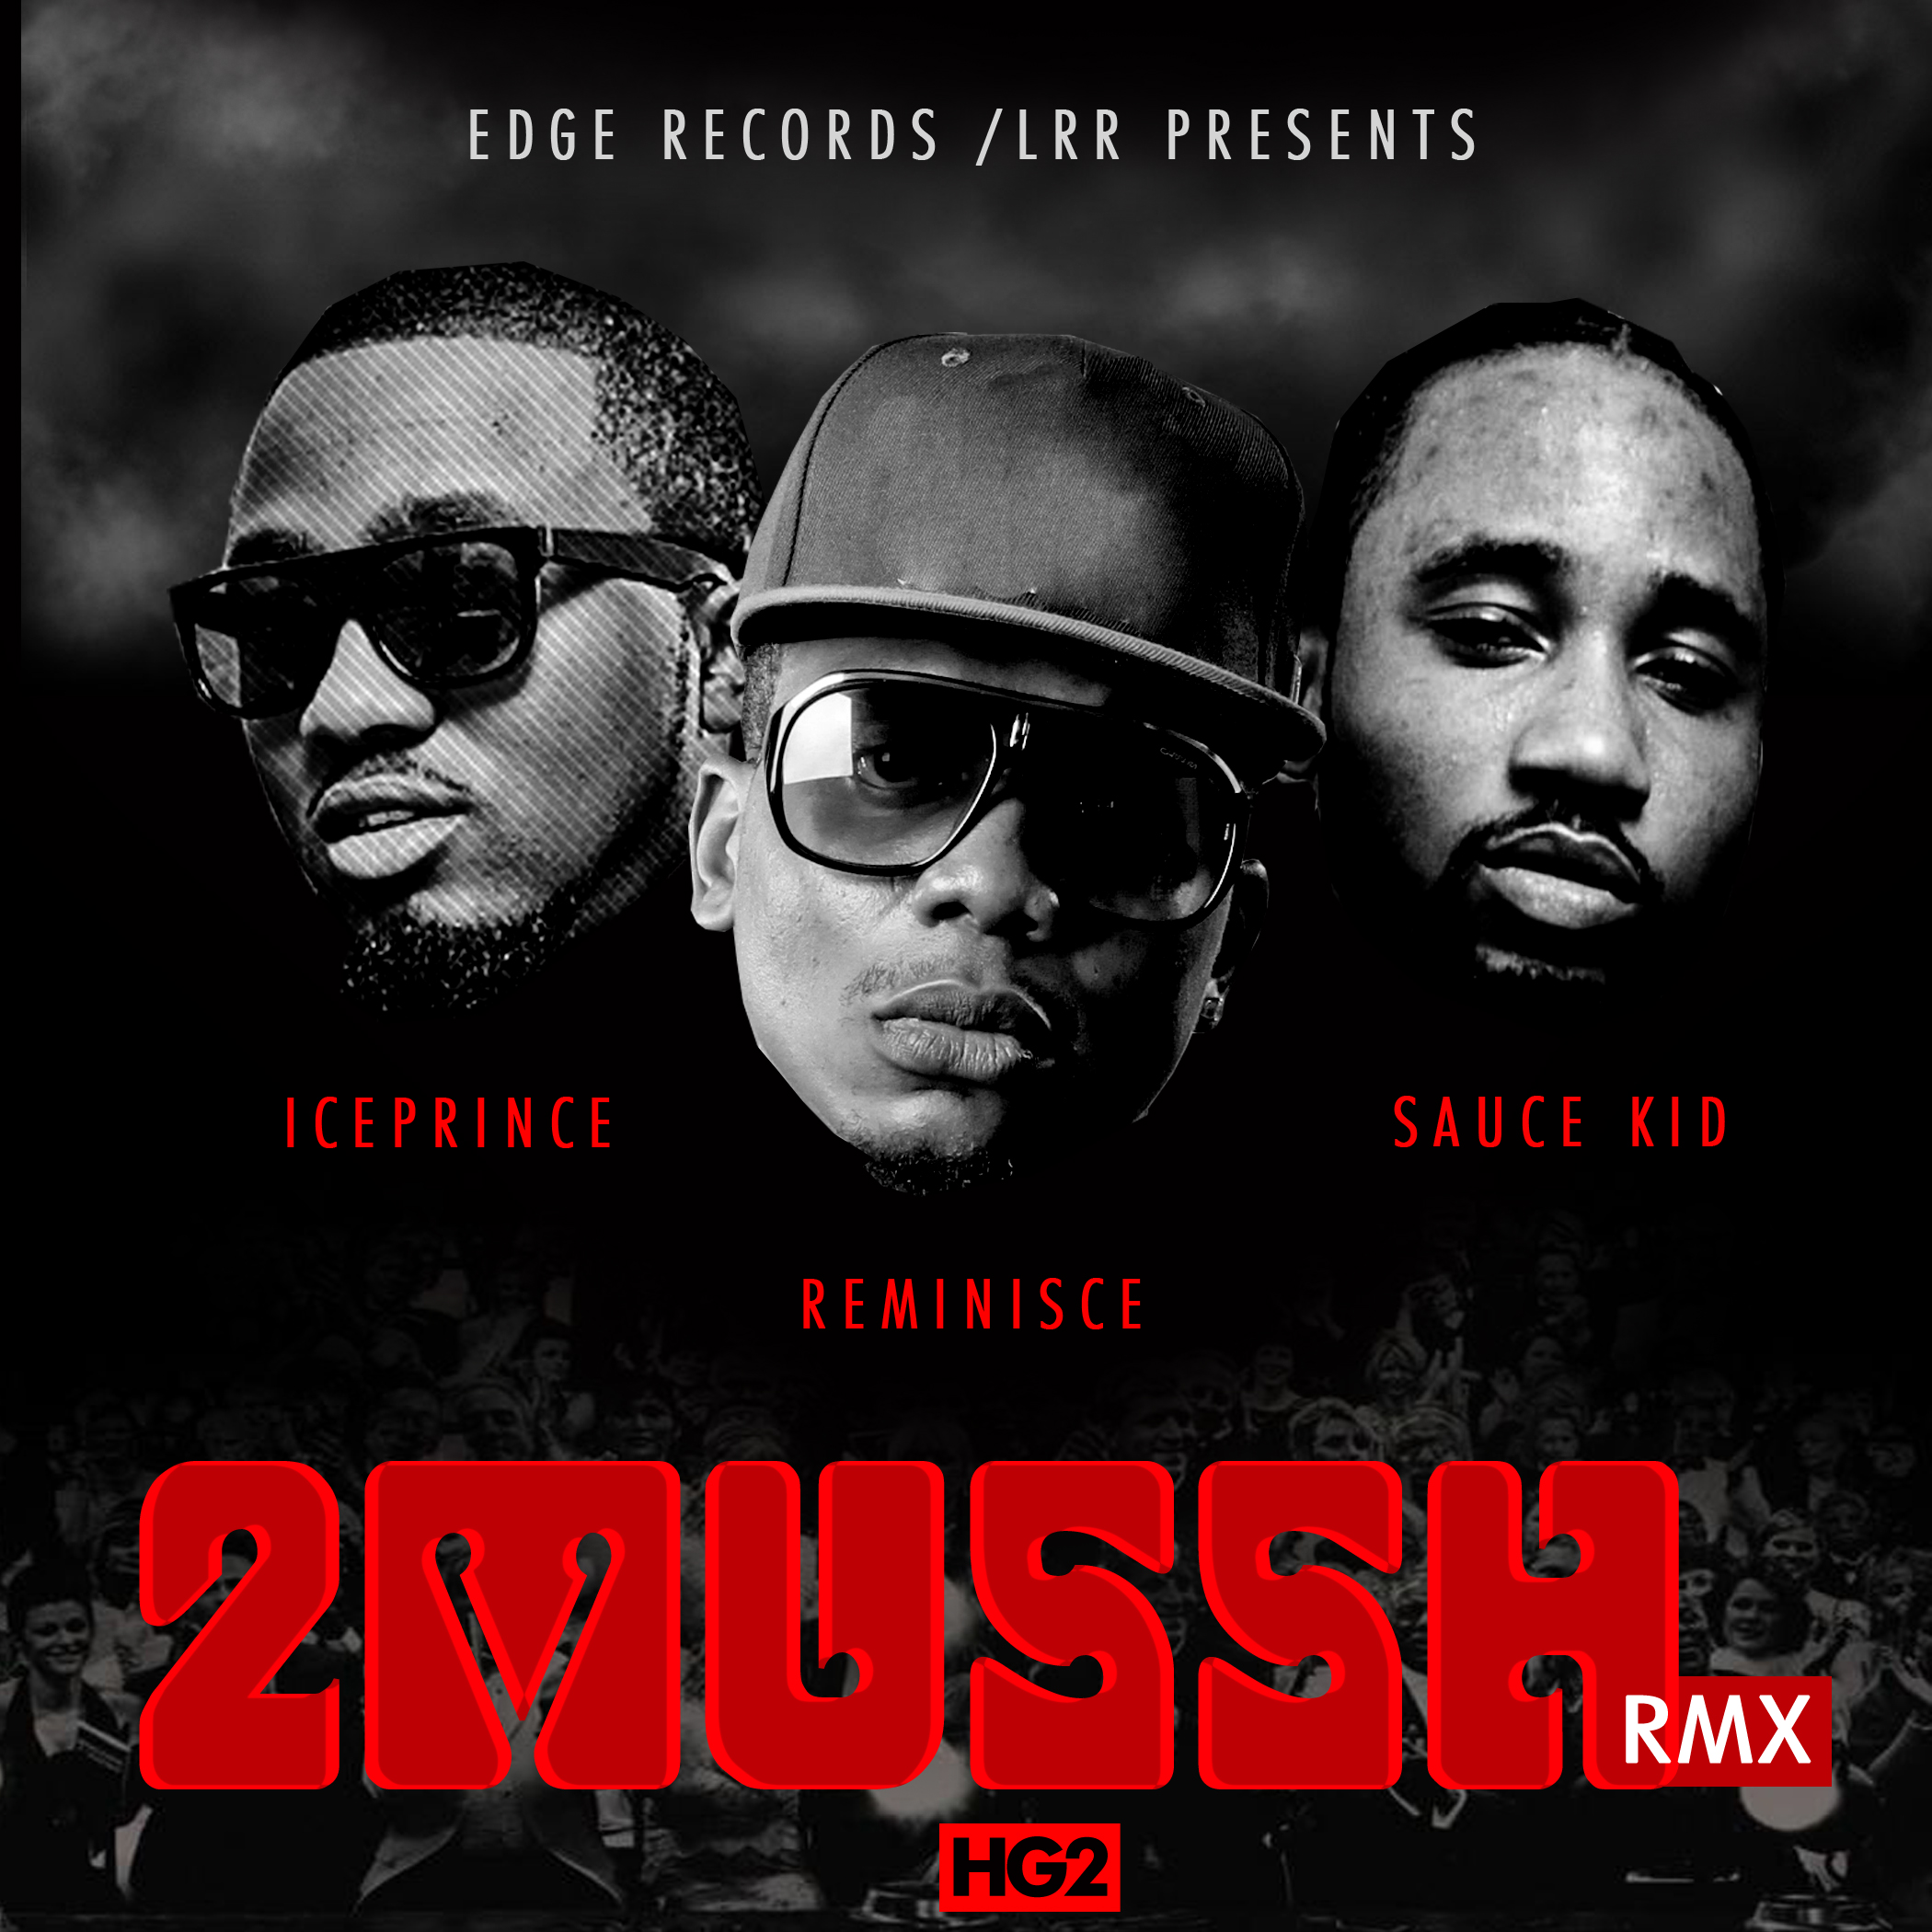 2mussh video by reminisce